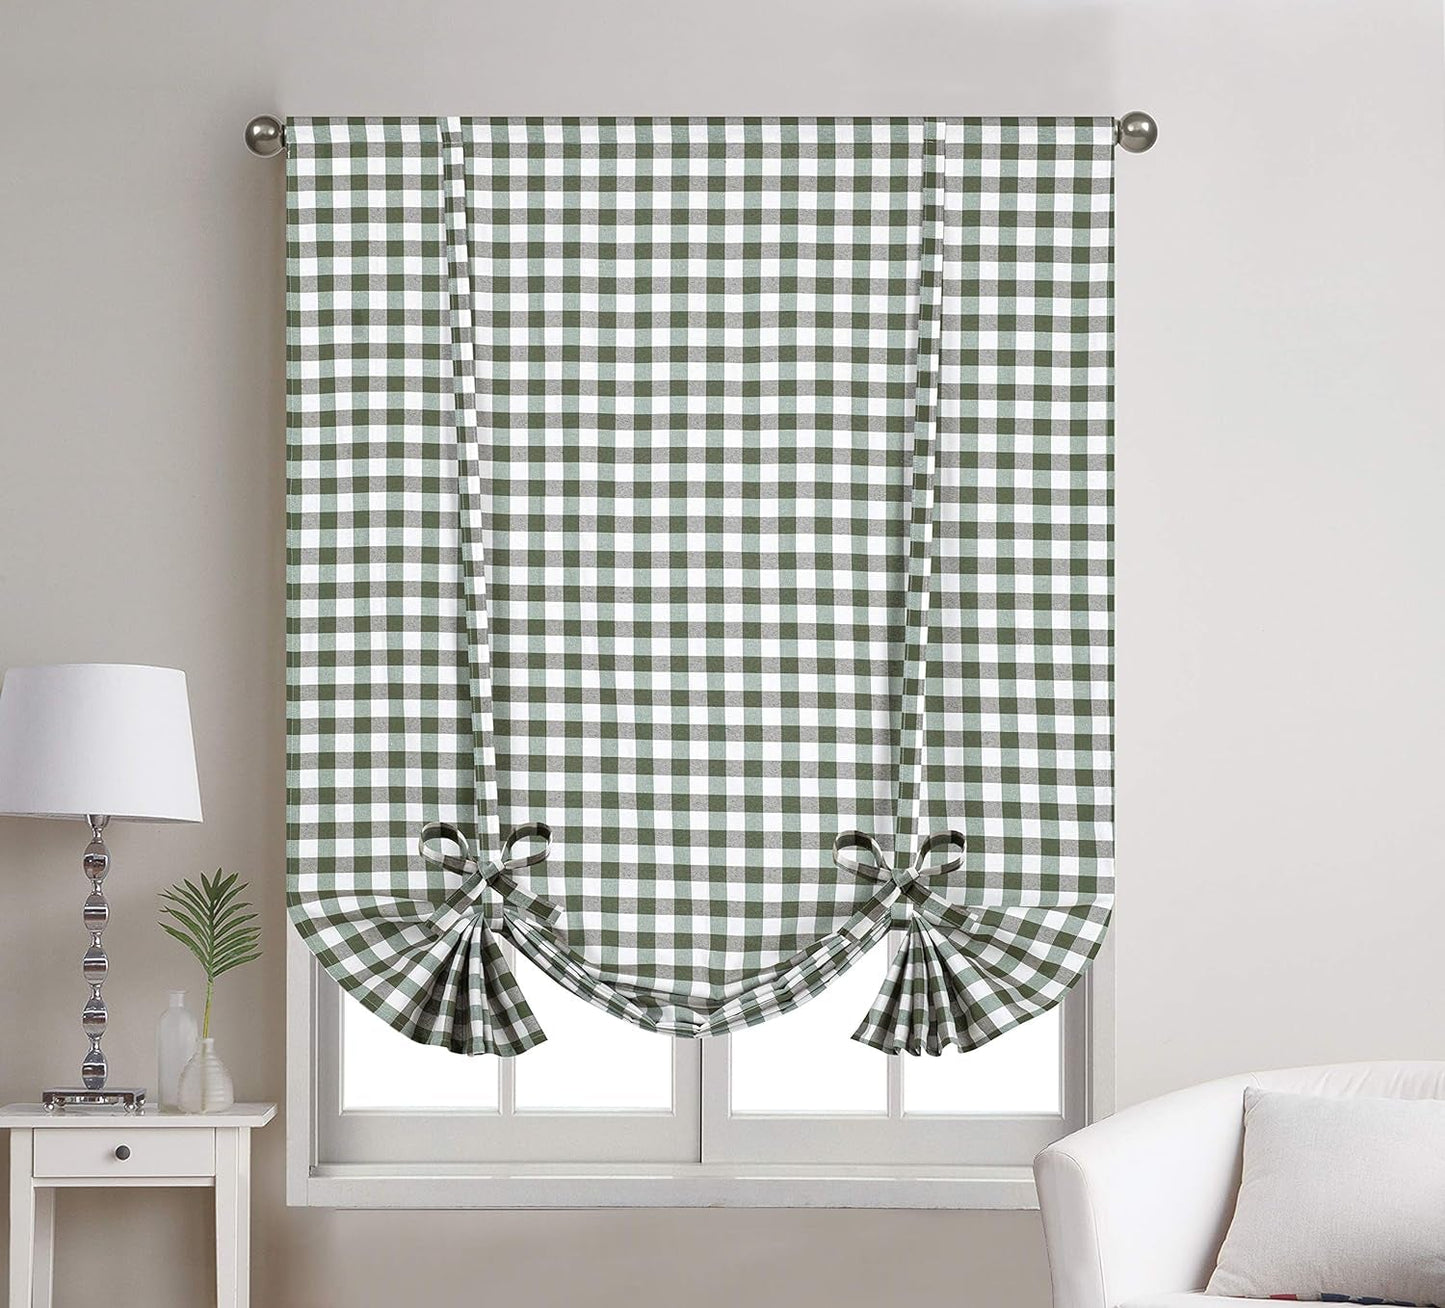 1 Piece Buffalo Check Plaid Gingham Rod Pocket Window Tie up Shade Curtain Panel (42" X 63", Taupe/Beige)